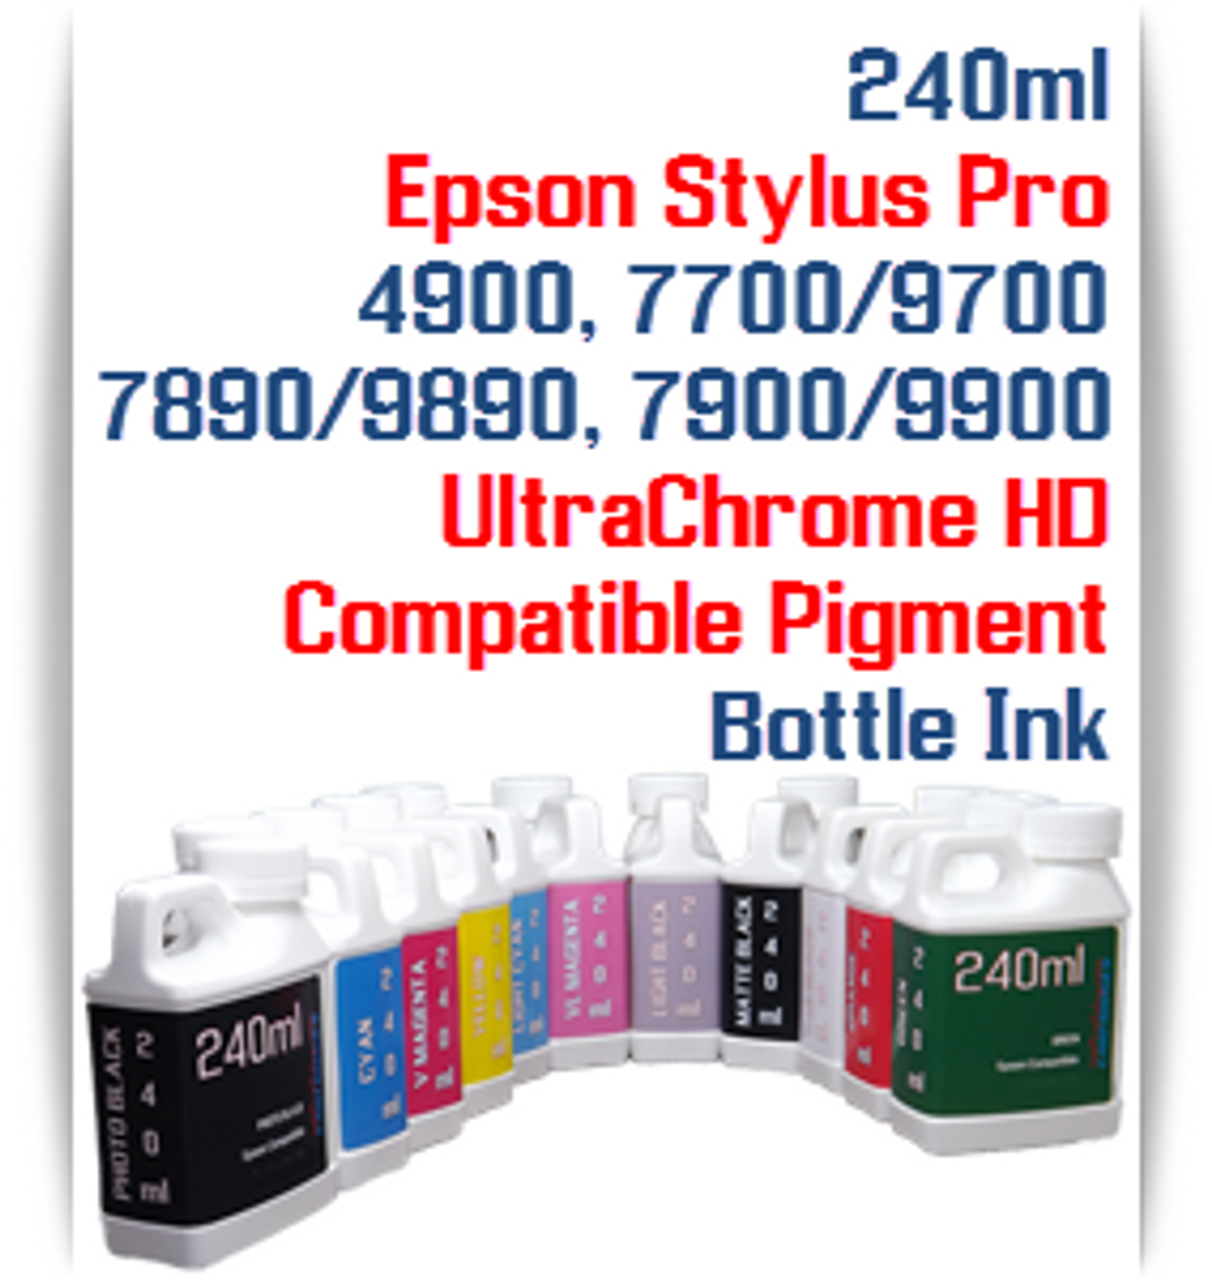 240ml Bottle Compatible UltraChrome HDR Pigment Ink Epson Stylus Pro 4900, 7700, 9700, 7890, 9890, 7900, 9900 Printers